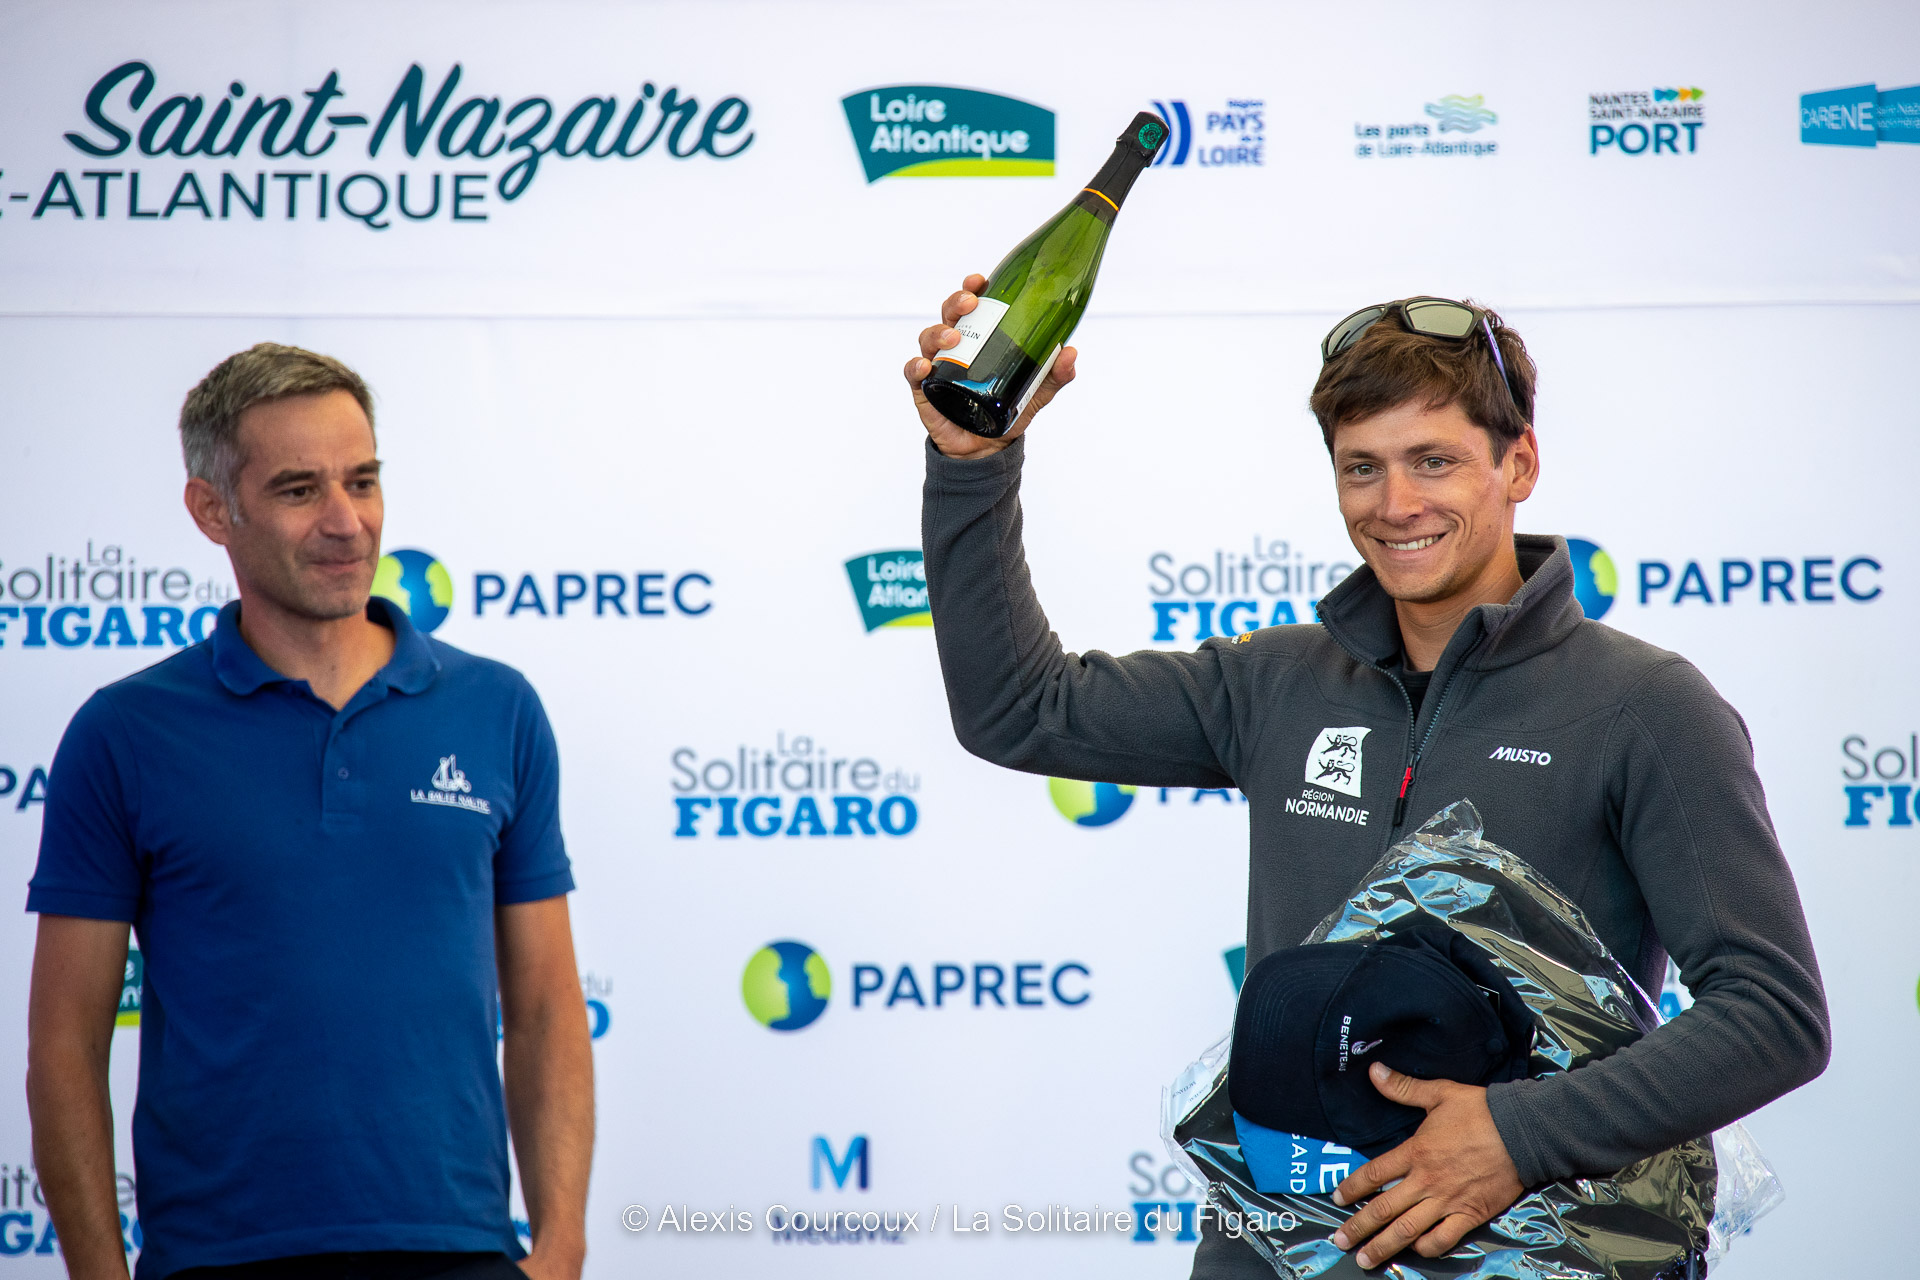 1662781584 289 The final stage podium celebrated in Saint Nazaire News